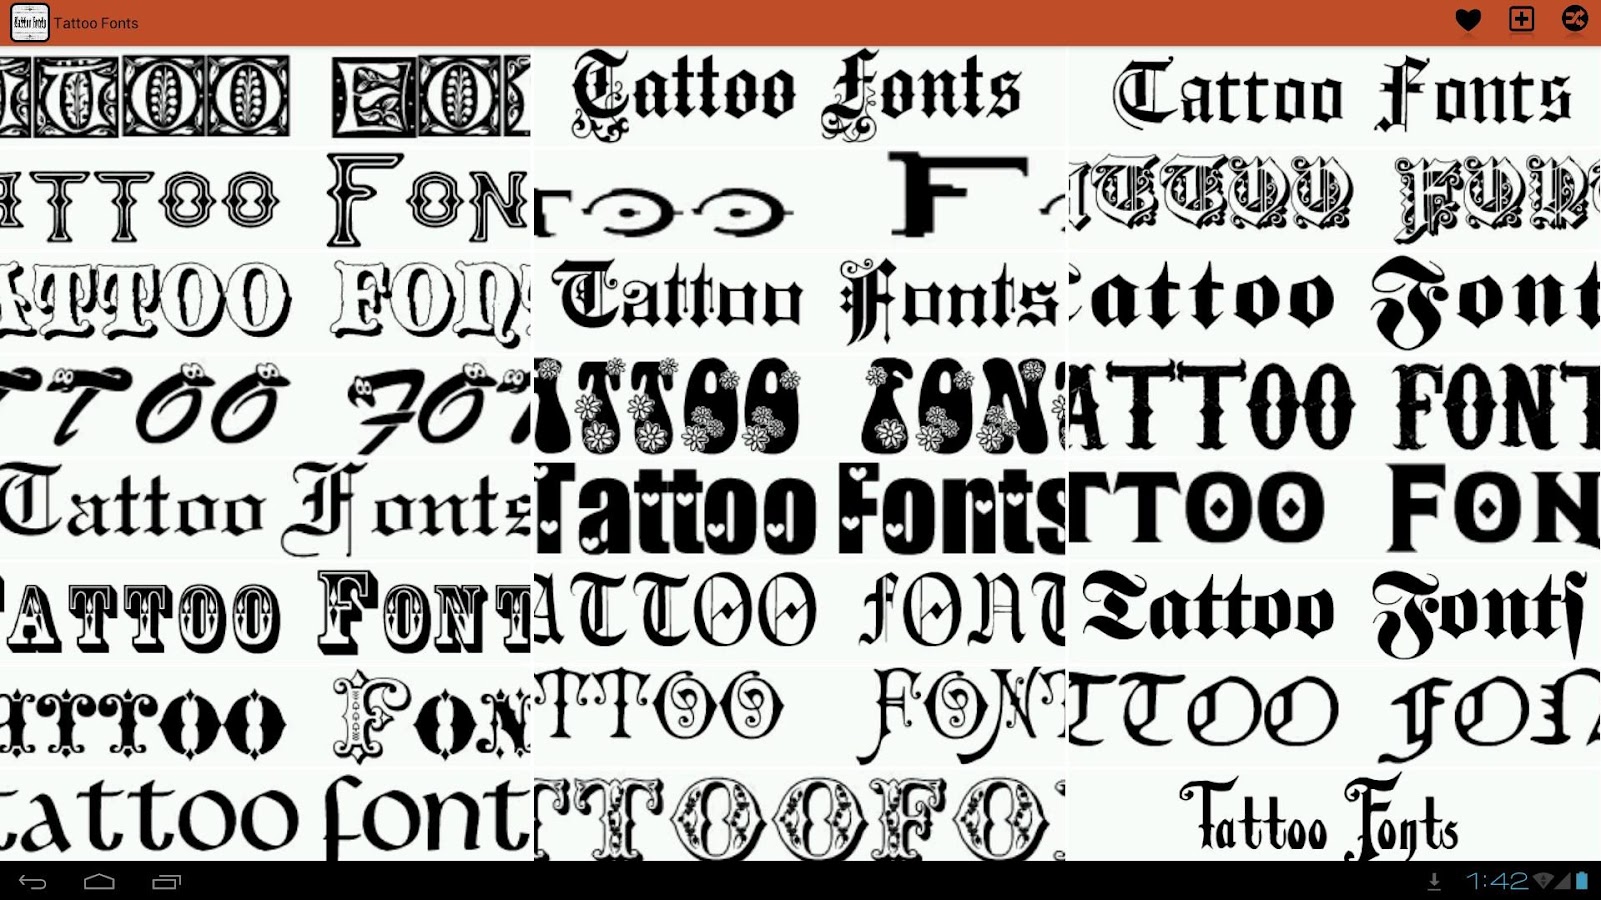 Tattoo Fonts Ideas - Android Apps on Google Play